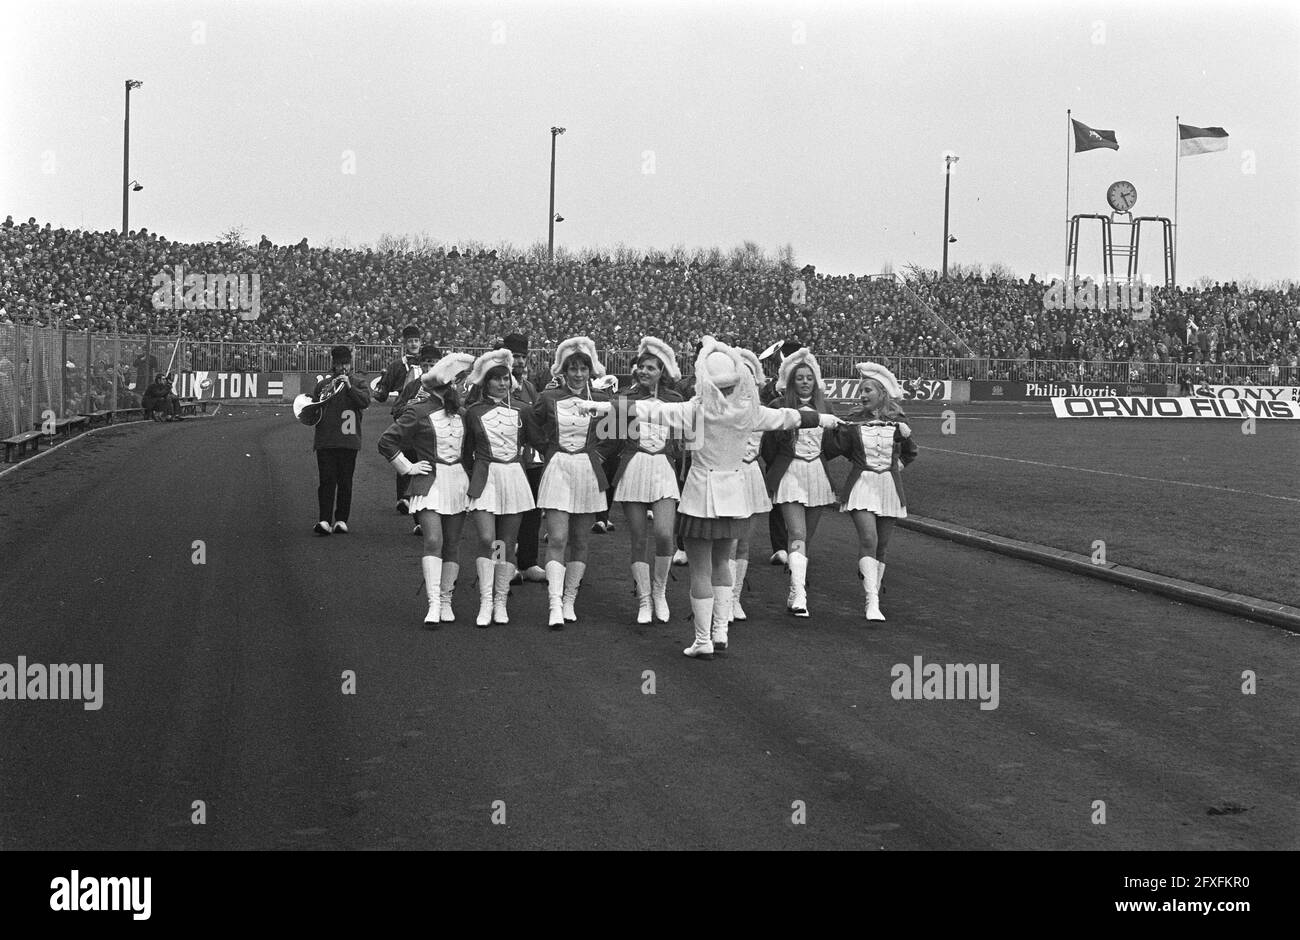 Twente against PSV 2-1; majorettes in stadium, 28 February 1971, MAJORETTES, sports, stadiums, soccer, The Netherlands, 20th century press agency photo, news to remember, documentary, historic photography 1945-1990, visual stories, human history of the Twentieth Century, capturing moments in time Stock Photo